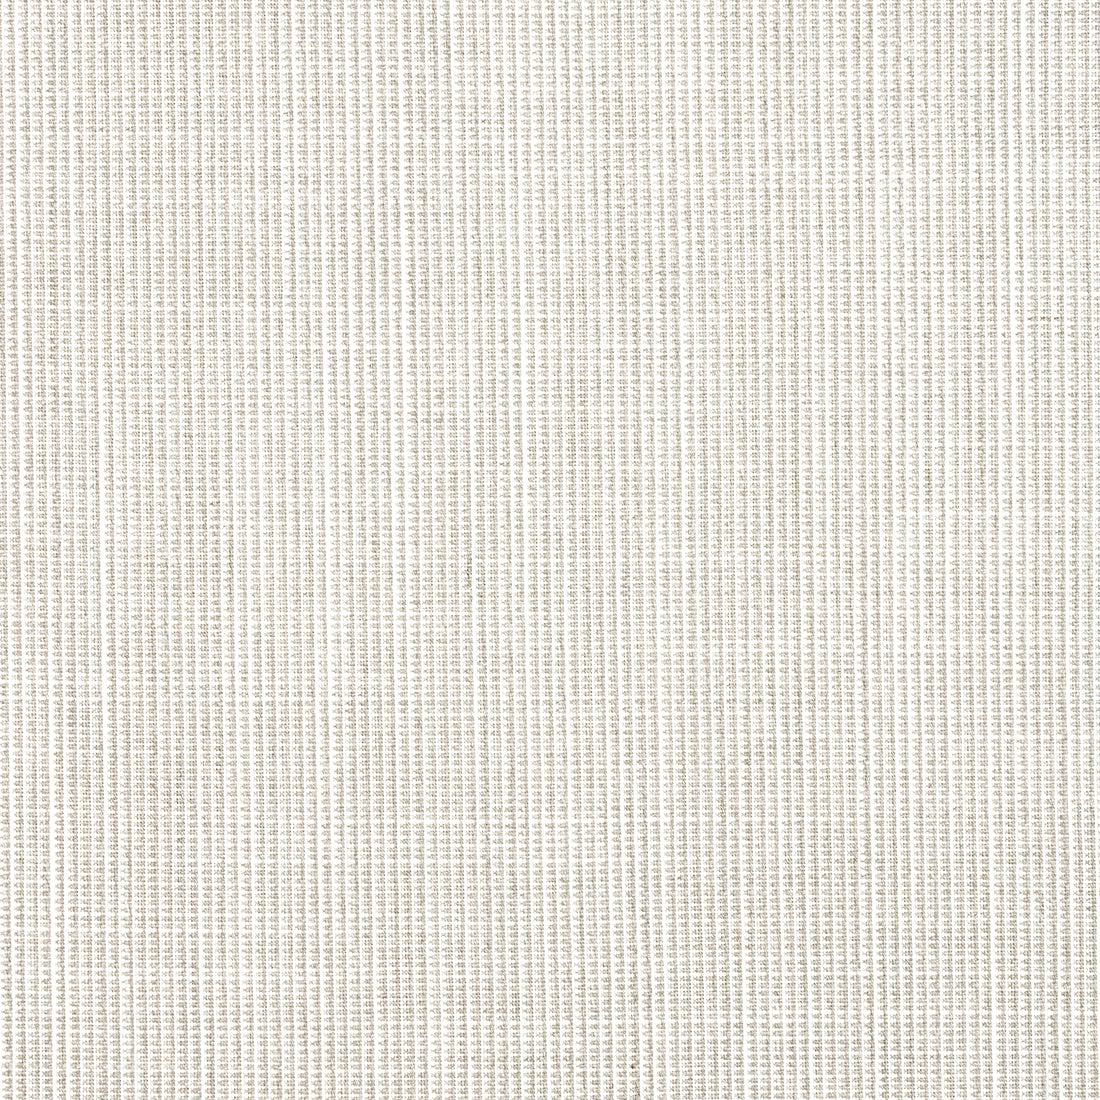 Mateo fabric in sand color - pattern number W8546 - by Thibaut in the Villa Textures collection